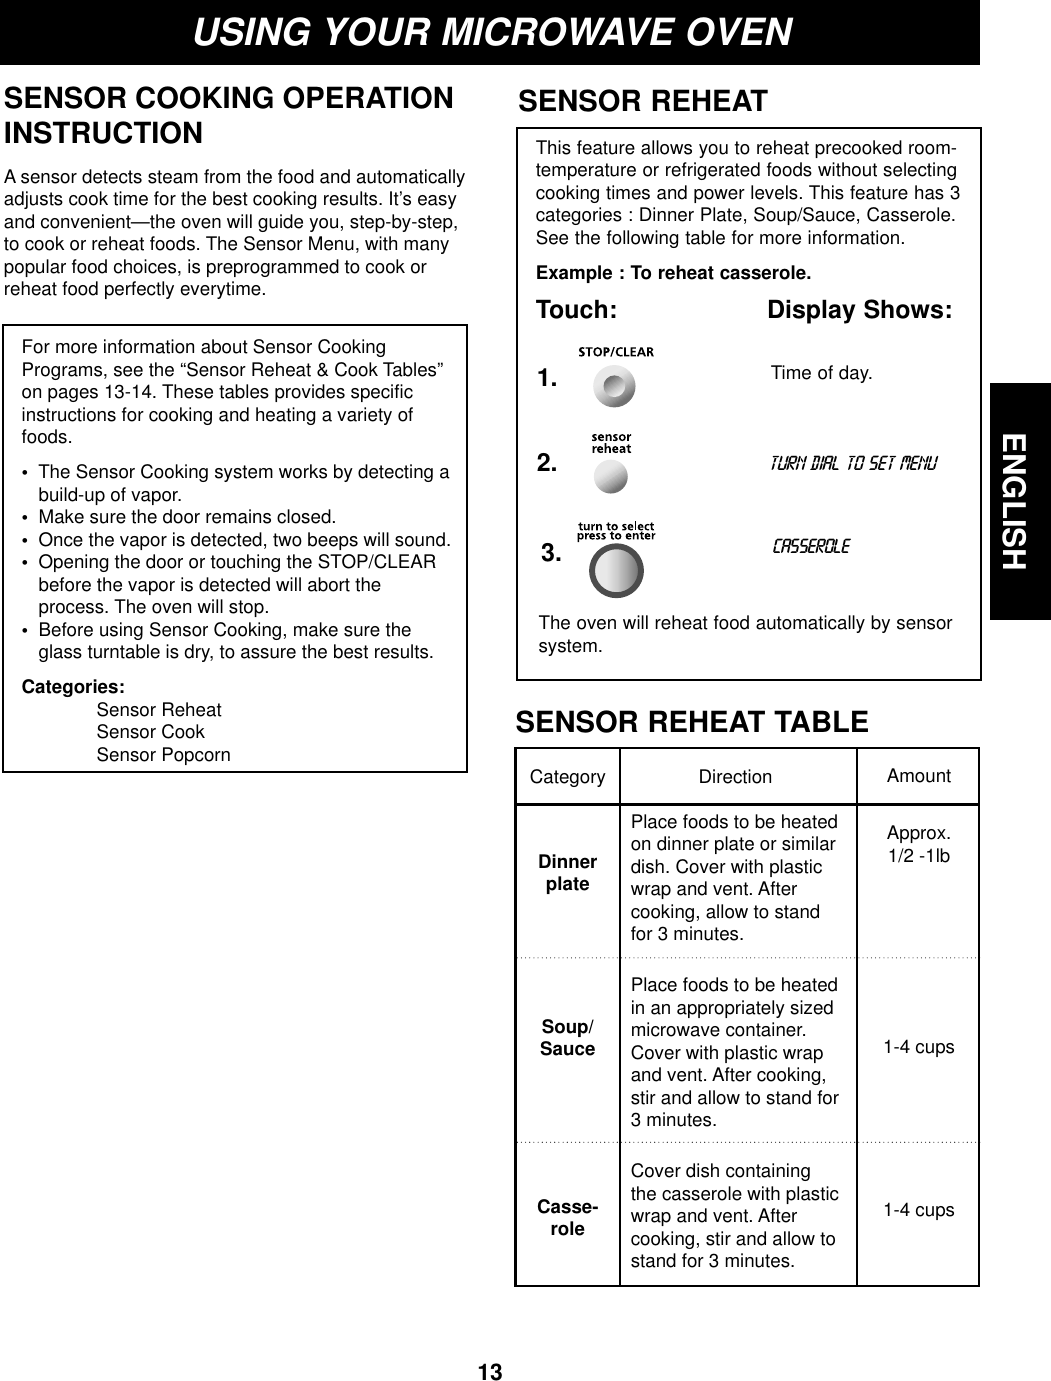 ENGLISH13USING YOUR MICROWAVE OVENThis feature allows you to reheat precooked room-temperature or refrigerated foods without selectingcooking times and power levels. This feature has 3categories : Dinner Plate, Soup/Sauce, Casserole.See the following table for more information.Example : To reheat casserole.Touch: Display Shows:SENSOR REHEATThe oven will reheat food automatically by sensorsystem.2. turn dial to set menuCASSEROLE3.Time of day.1.SENSOR COOKING OPERATIONINSTRUCTIONA sensor detects steam from the food and automaticallyadjusts cook time for the best cooking results. It’s easyand convenient—the oven will guide you, step-by-step,to cook or reheat foods. The Sensor Menu, with manypopular food choices, is preprogrammed to cook orreheat food perfectly everytime.For more information about Sensor CookingPrograms, see the “Sensor Reheat &amp; Cook Tables”on pages 13-14. These tables provides specificinstructions for cooking and heating a variety offoods.•The Sensor Cooking system works by detecting abuild-up of vapor.•Make sure the door remains closed.•Once the vapor is detected, two beeps will sound.•Opening the door or touching the STOP/CLEARbefore the vapor is detected will abort theprocess. The oven will stop.•Before using Sensor Cooking, make sure theglass turntable is dry, to assure the best results.Categories:Sensor Reheat Sensor CookSensor PopcornSENSOR REHEAT TABLEAmountApprox.1/2 -1lb1-4 cups1-4 cupsDirectionPlace foods to be heatedon dinner plate or similardish. Cover with plasticwrap and vent. Aftercooking, allow to standfor 3 minutes.Place foods to be heatedin an appropriately sizedmicrowave container.Cover with plastic wrapand vent. After cooking,stir and allow to stand for3 minutes.Cover dish containingthe casserole with plasticwrap and vent. Aftercooking, stir and allow tostand for 3 minutes.CategoryDinnerplateSoup/SauceCasse-role